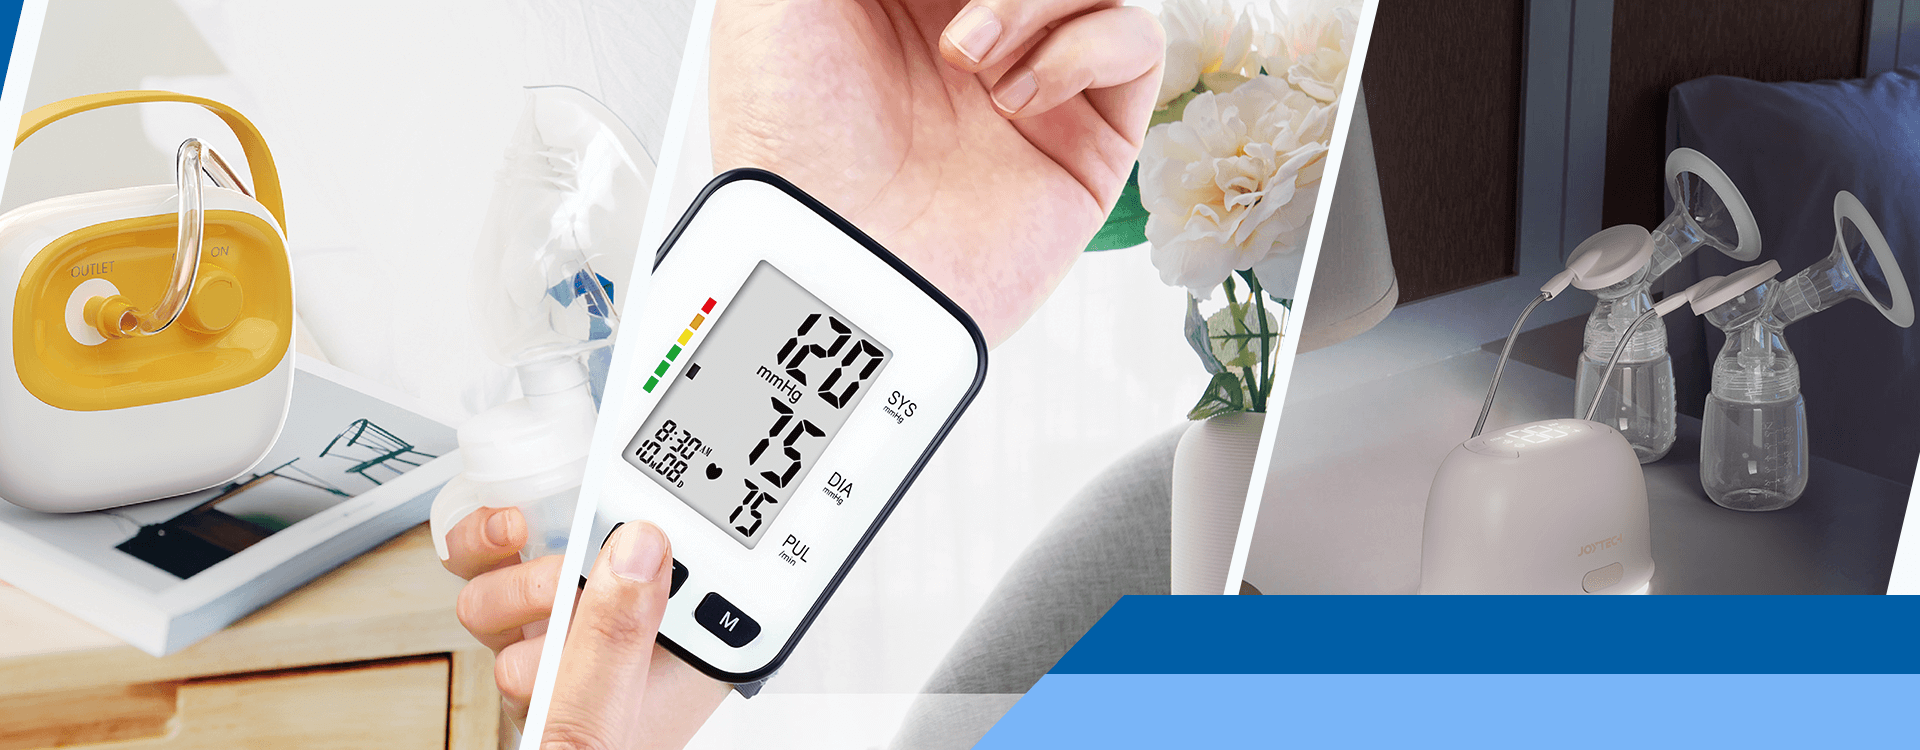 pulse oximeter, digital thermometer supplier